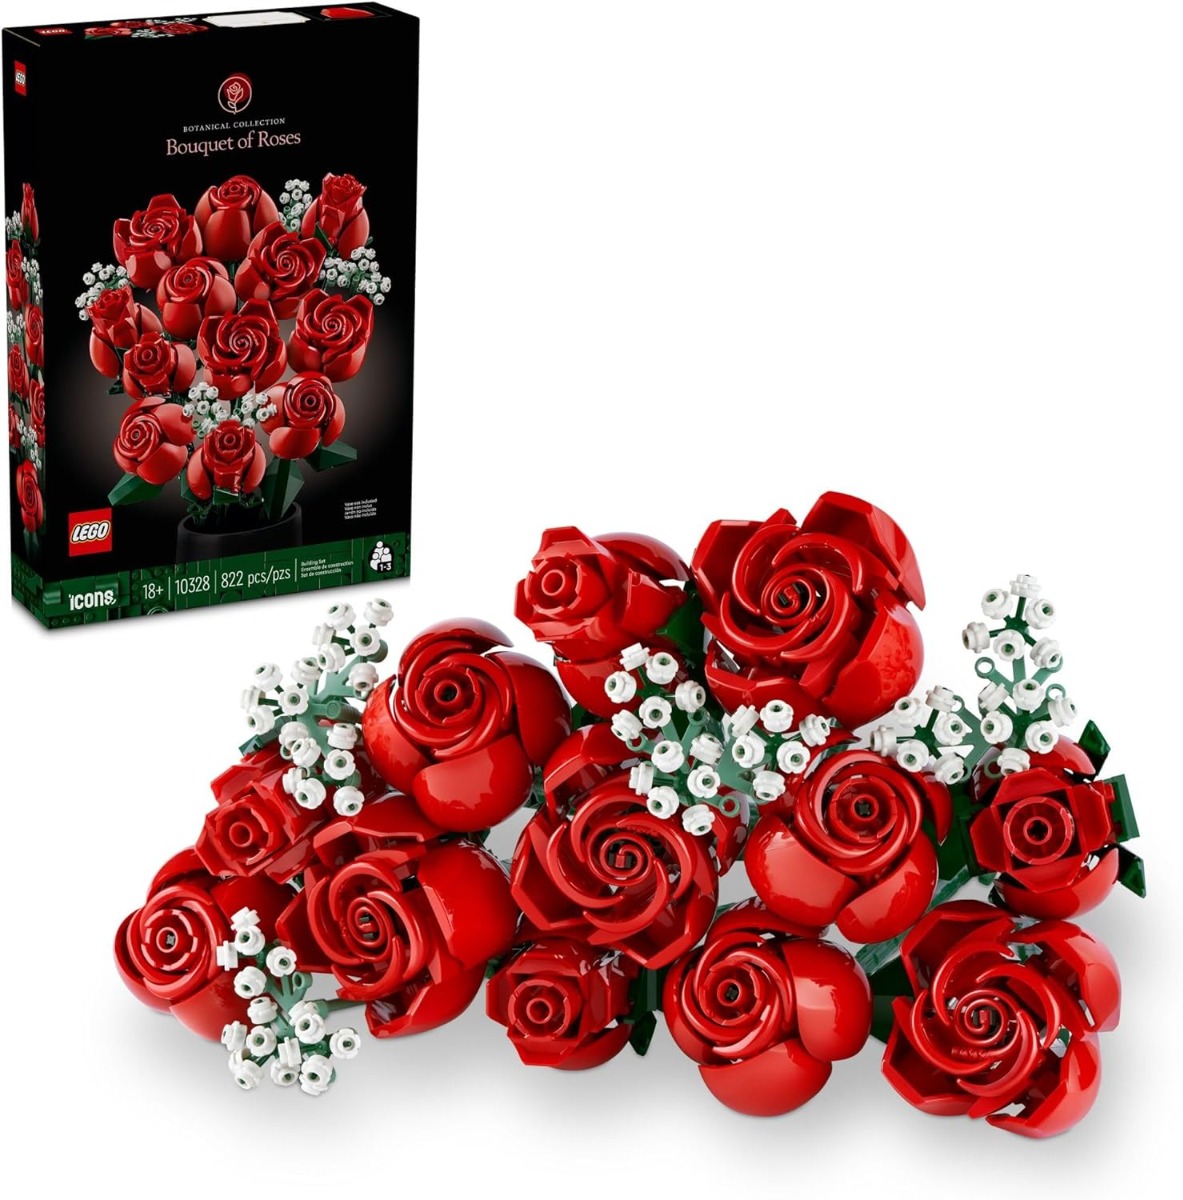 LEGO 10328 Botanical Collection - Bouquet of Roses